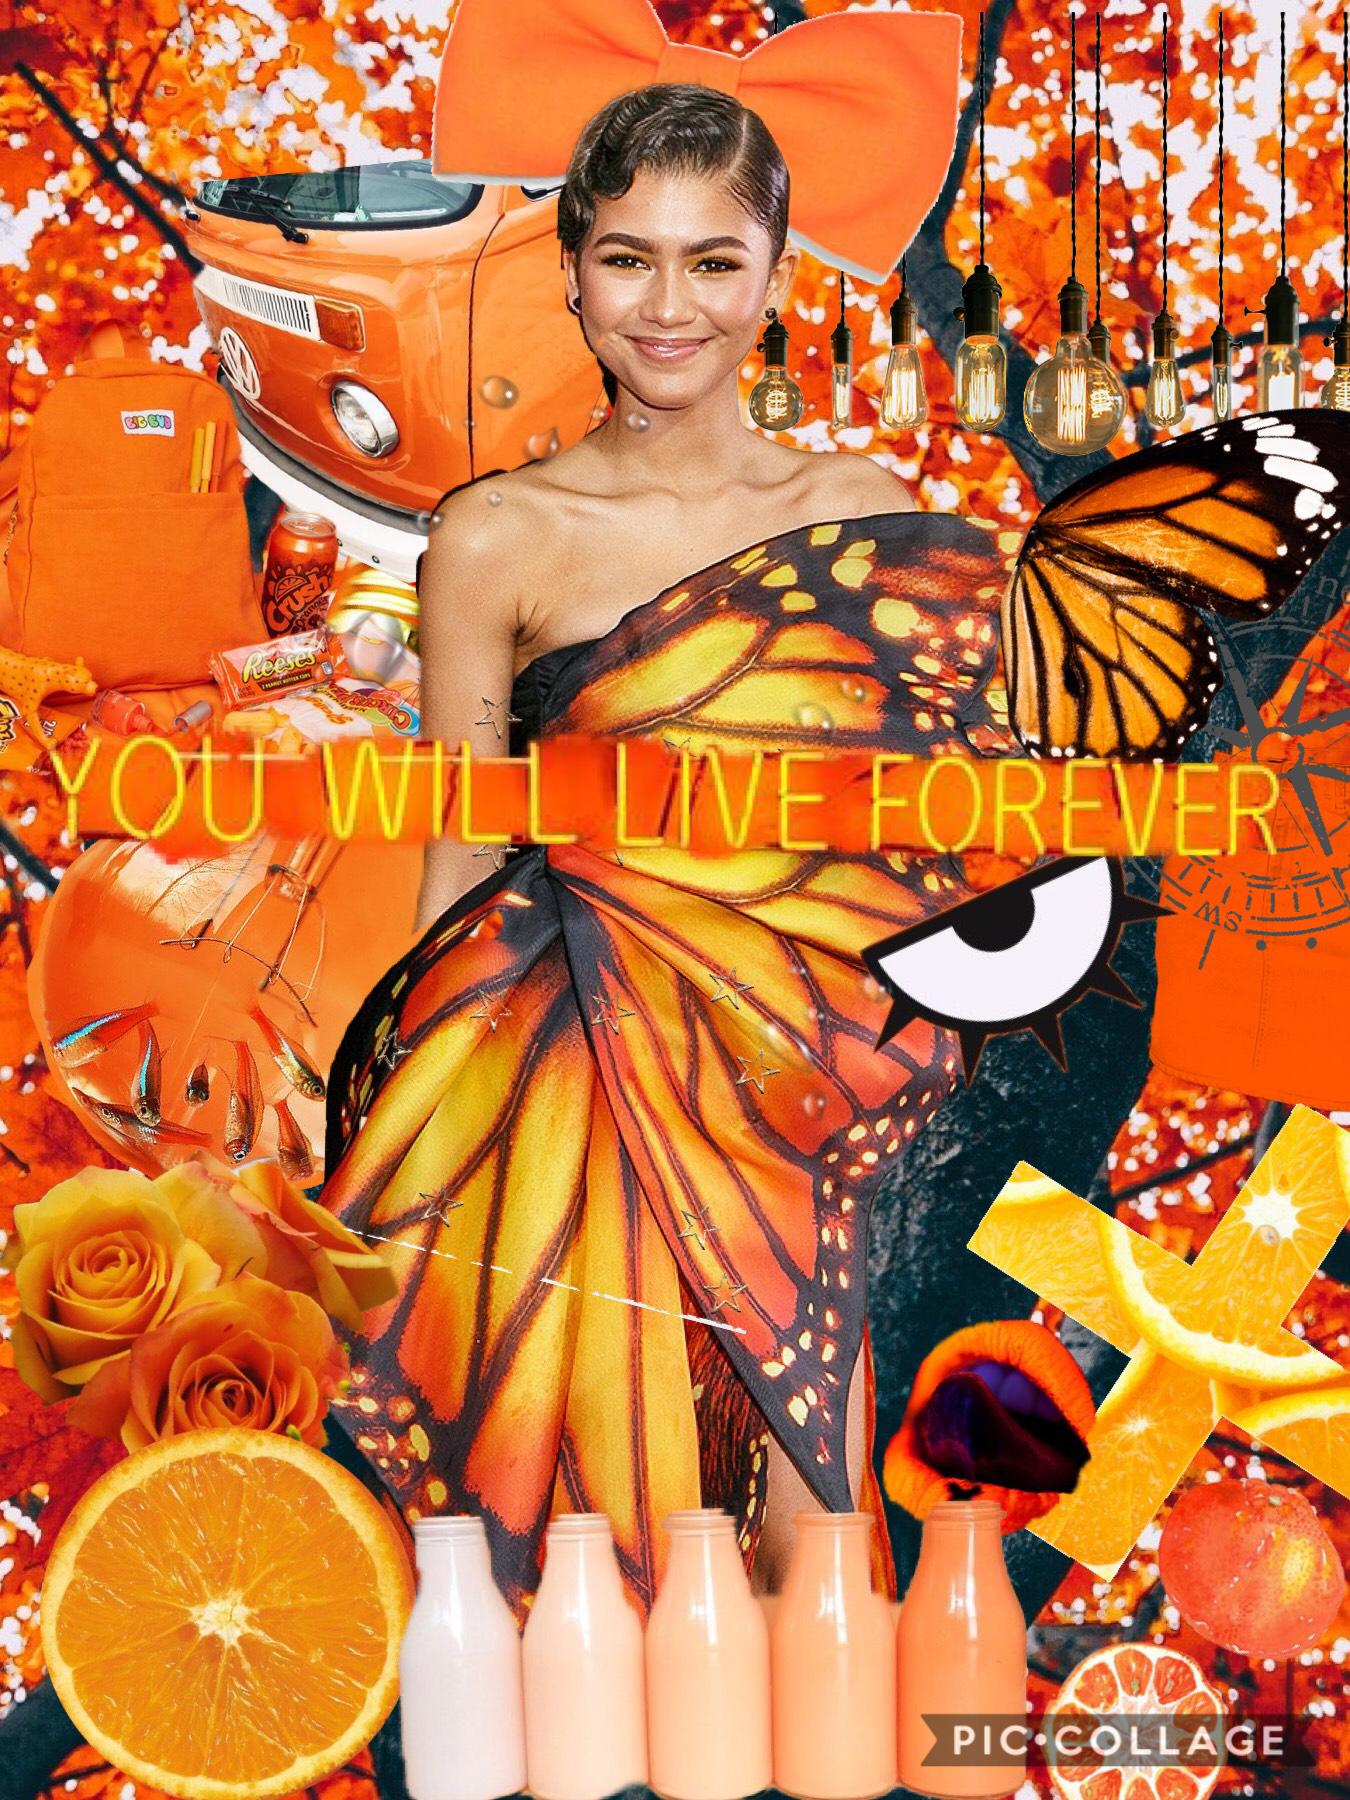                                                                  
                                                               🐹🦄T=A=P🦄🐹

Hey guys who is loving the orange Zendaya vibes this collage brings:)BTW I’m so sorry I haven’t posted for sooooo l